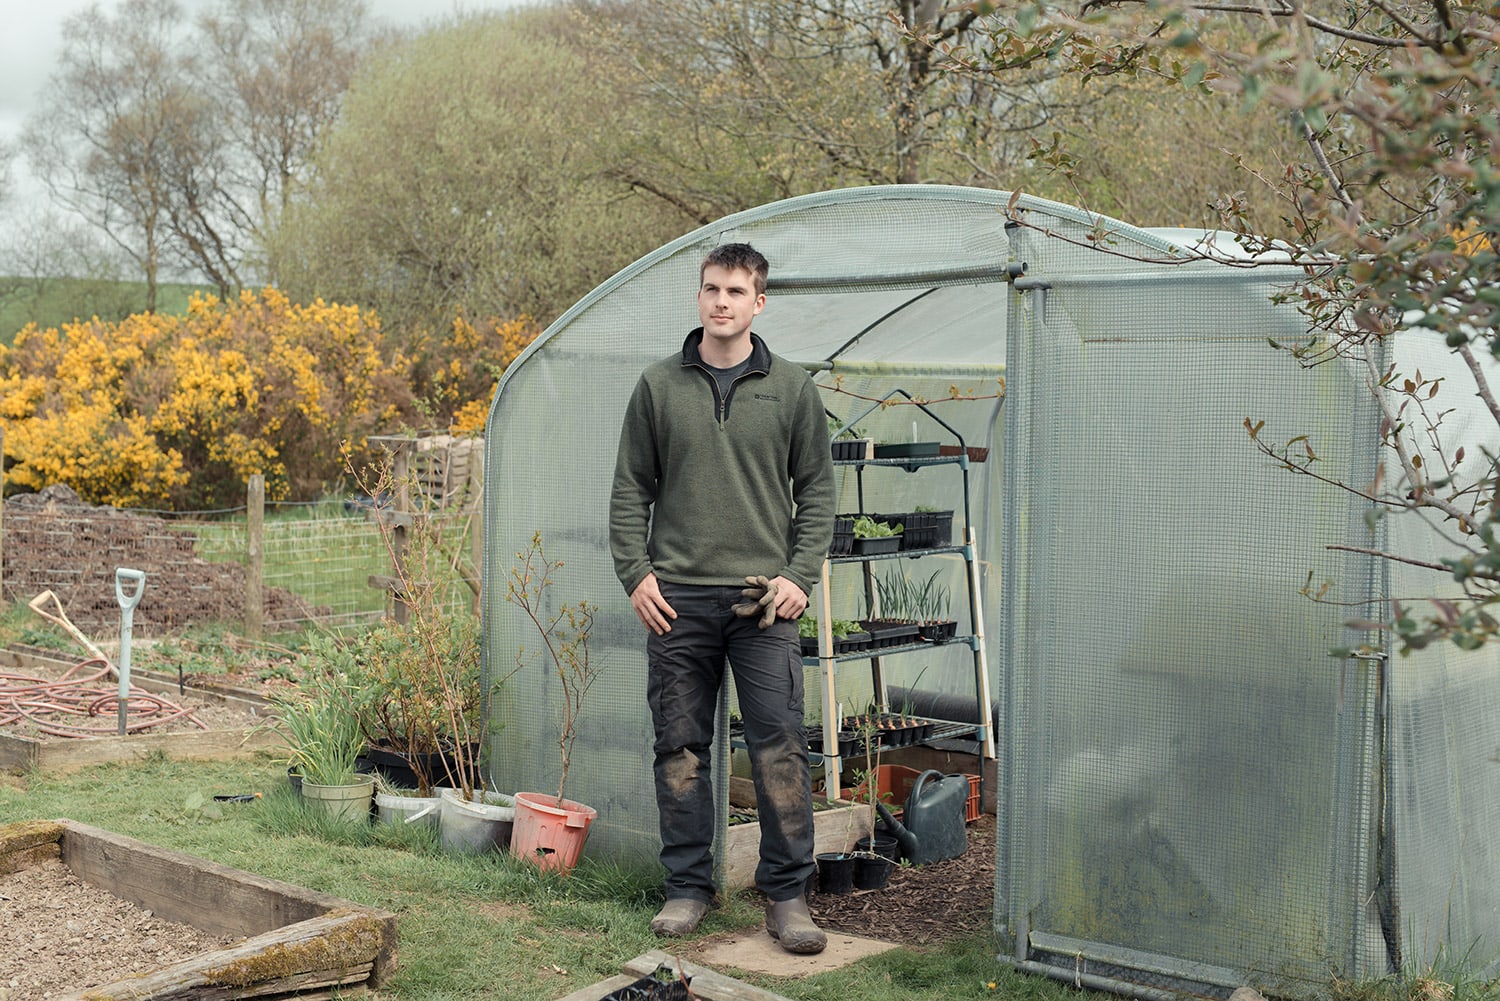 Huw Richards photographed for the Guardian Weekend in his vegetable garden in Tregaron, Wales